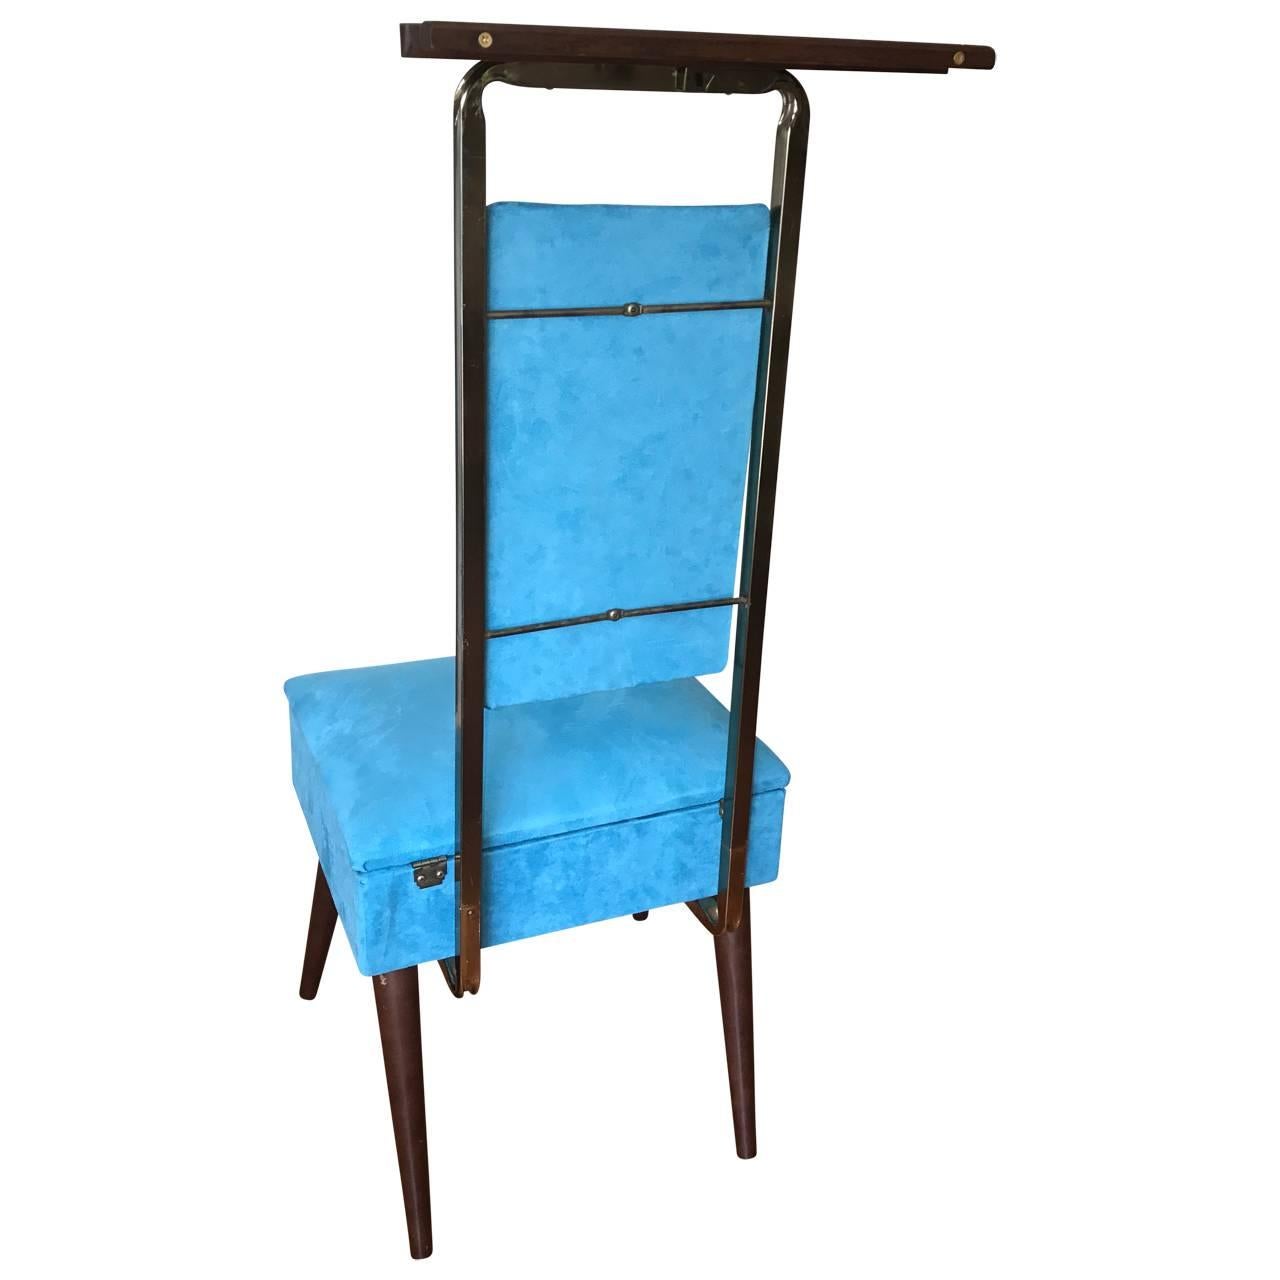 American Mid-Century Modern Valet Butlers Chair in Turquoise Fabric